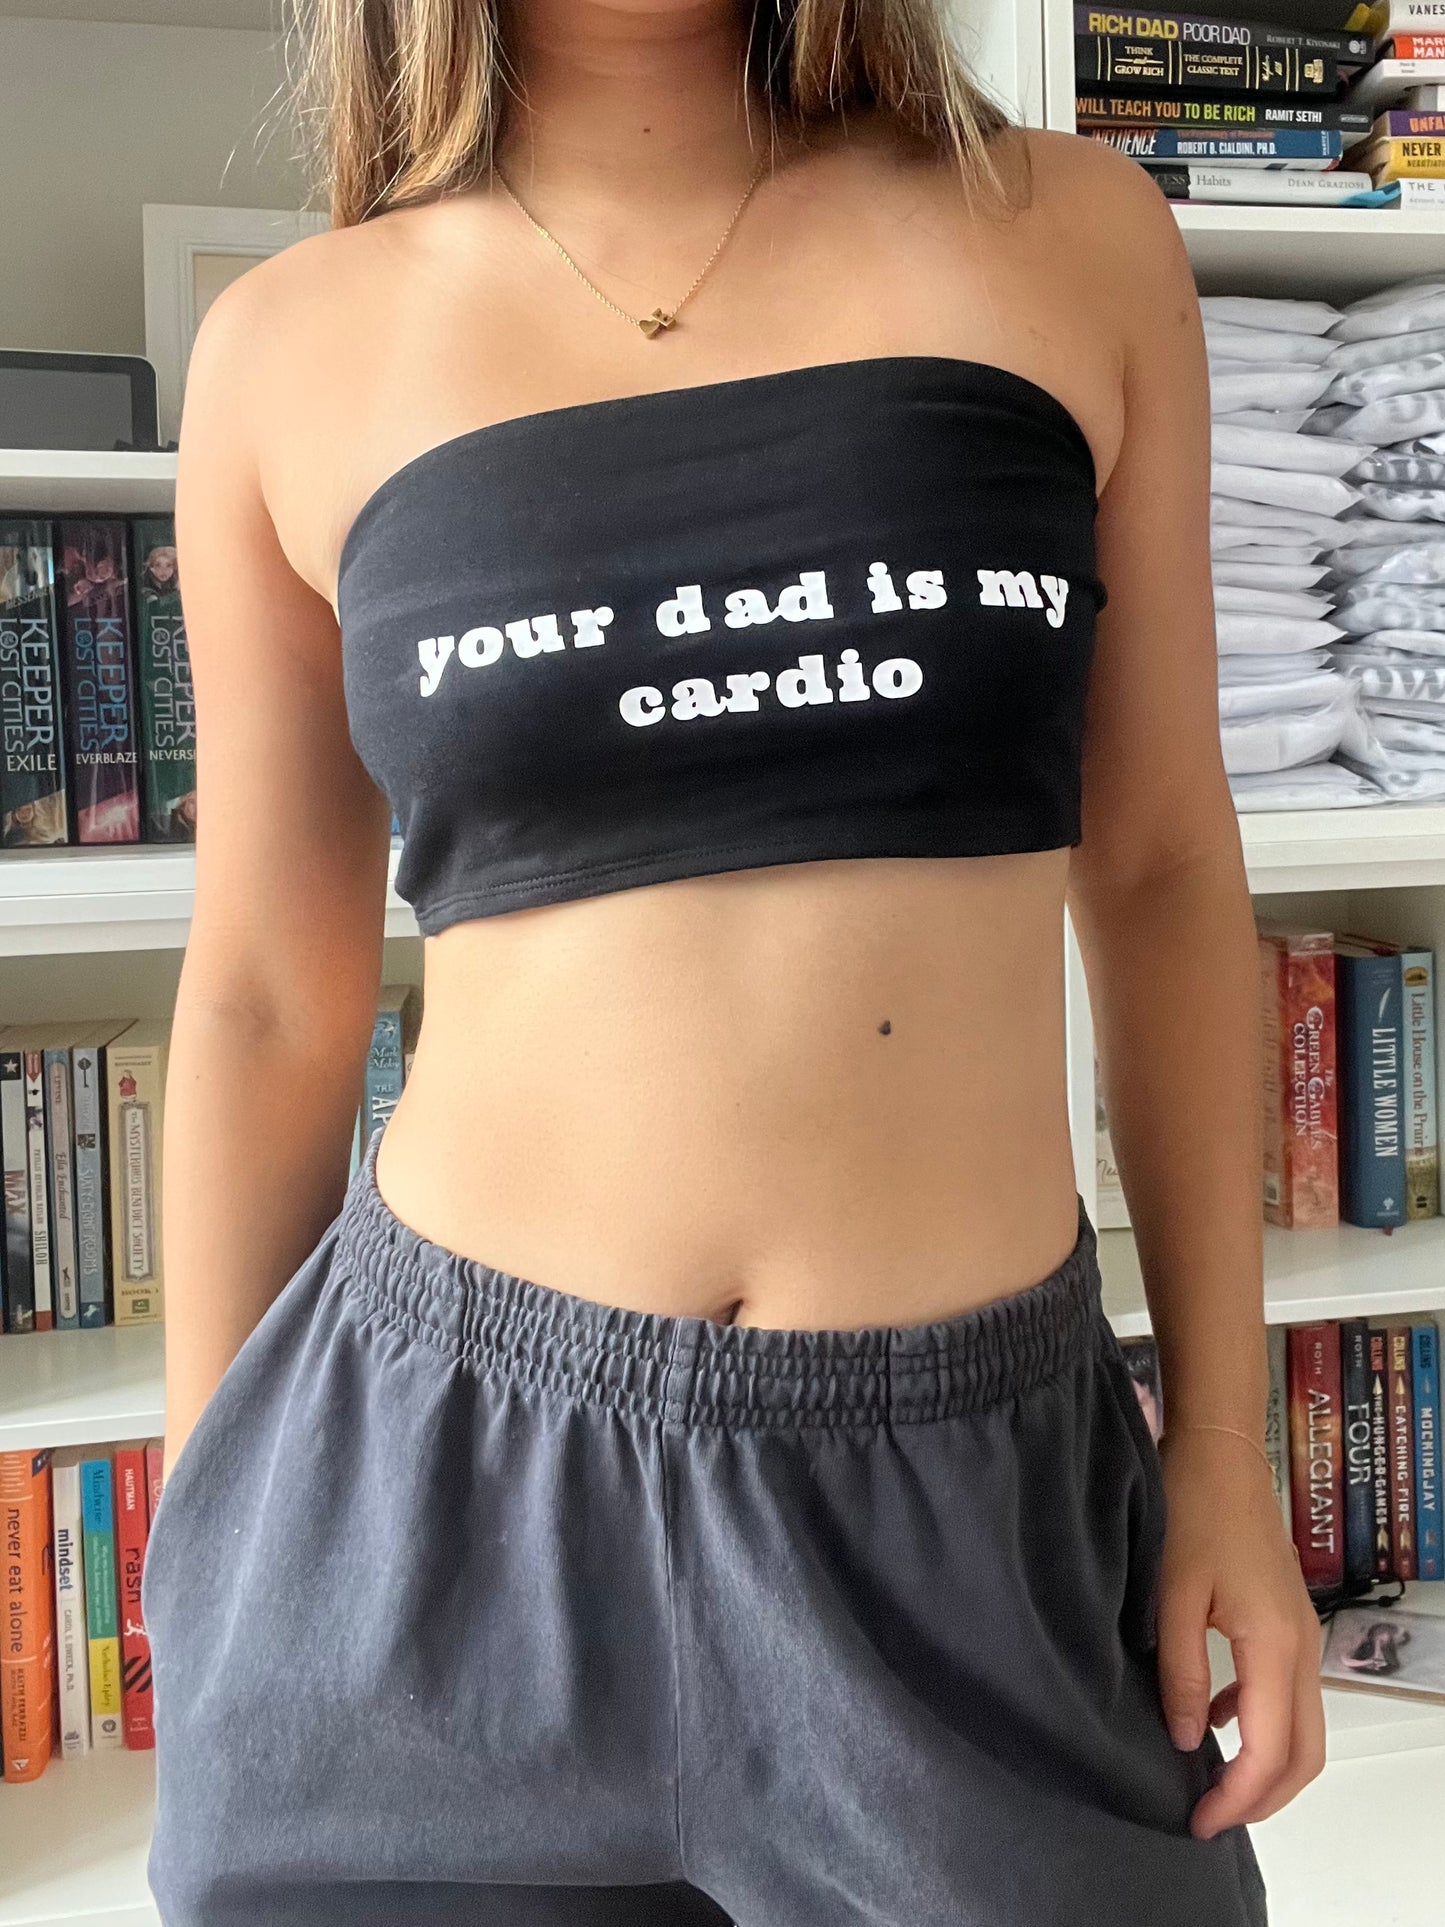 Your Dad Is My Cardio Black Tube Top